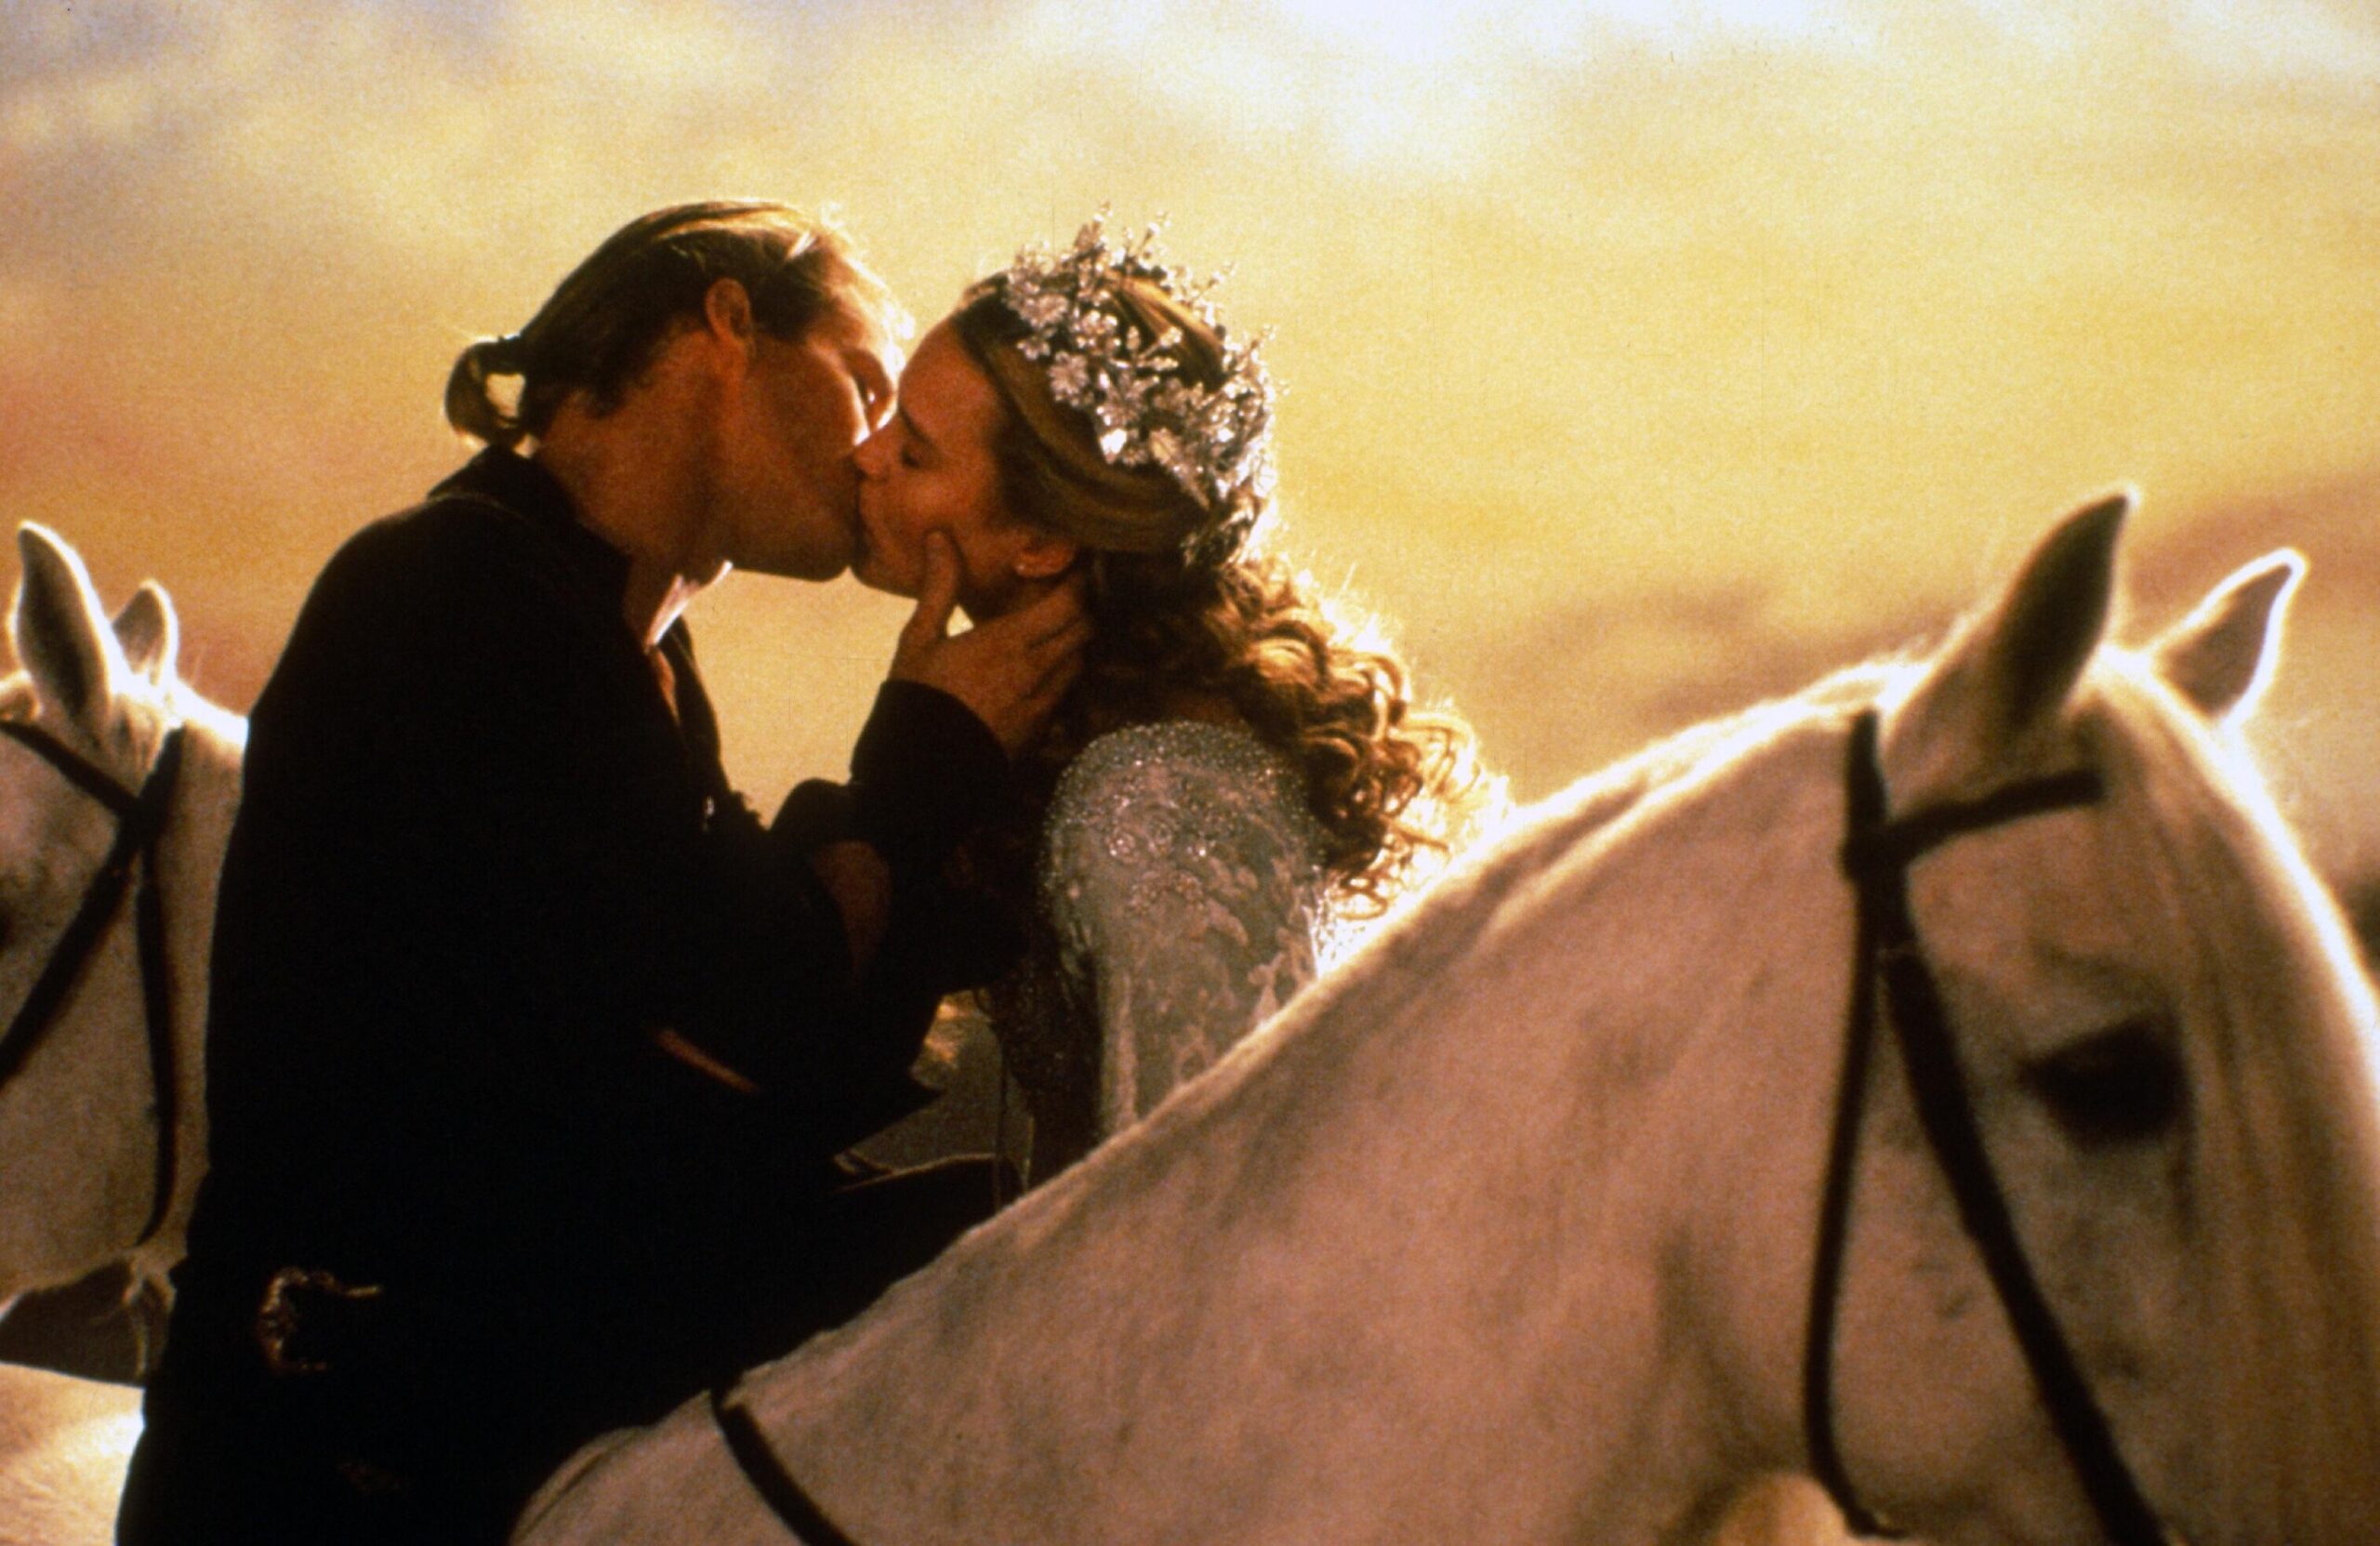 Westley and Buttercup Wallpaper the princess bride 2K wallpapers and